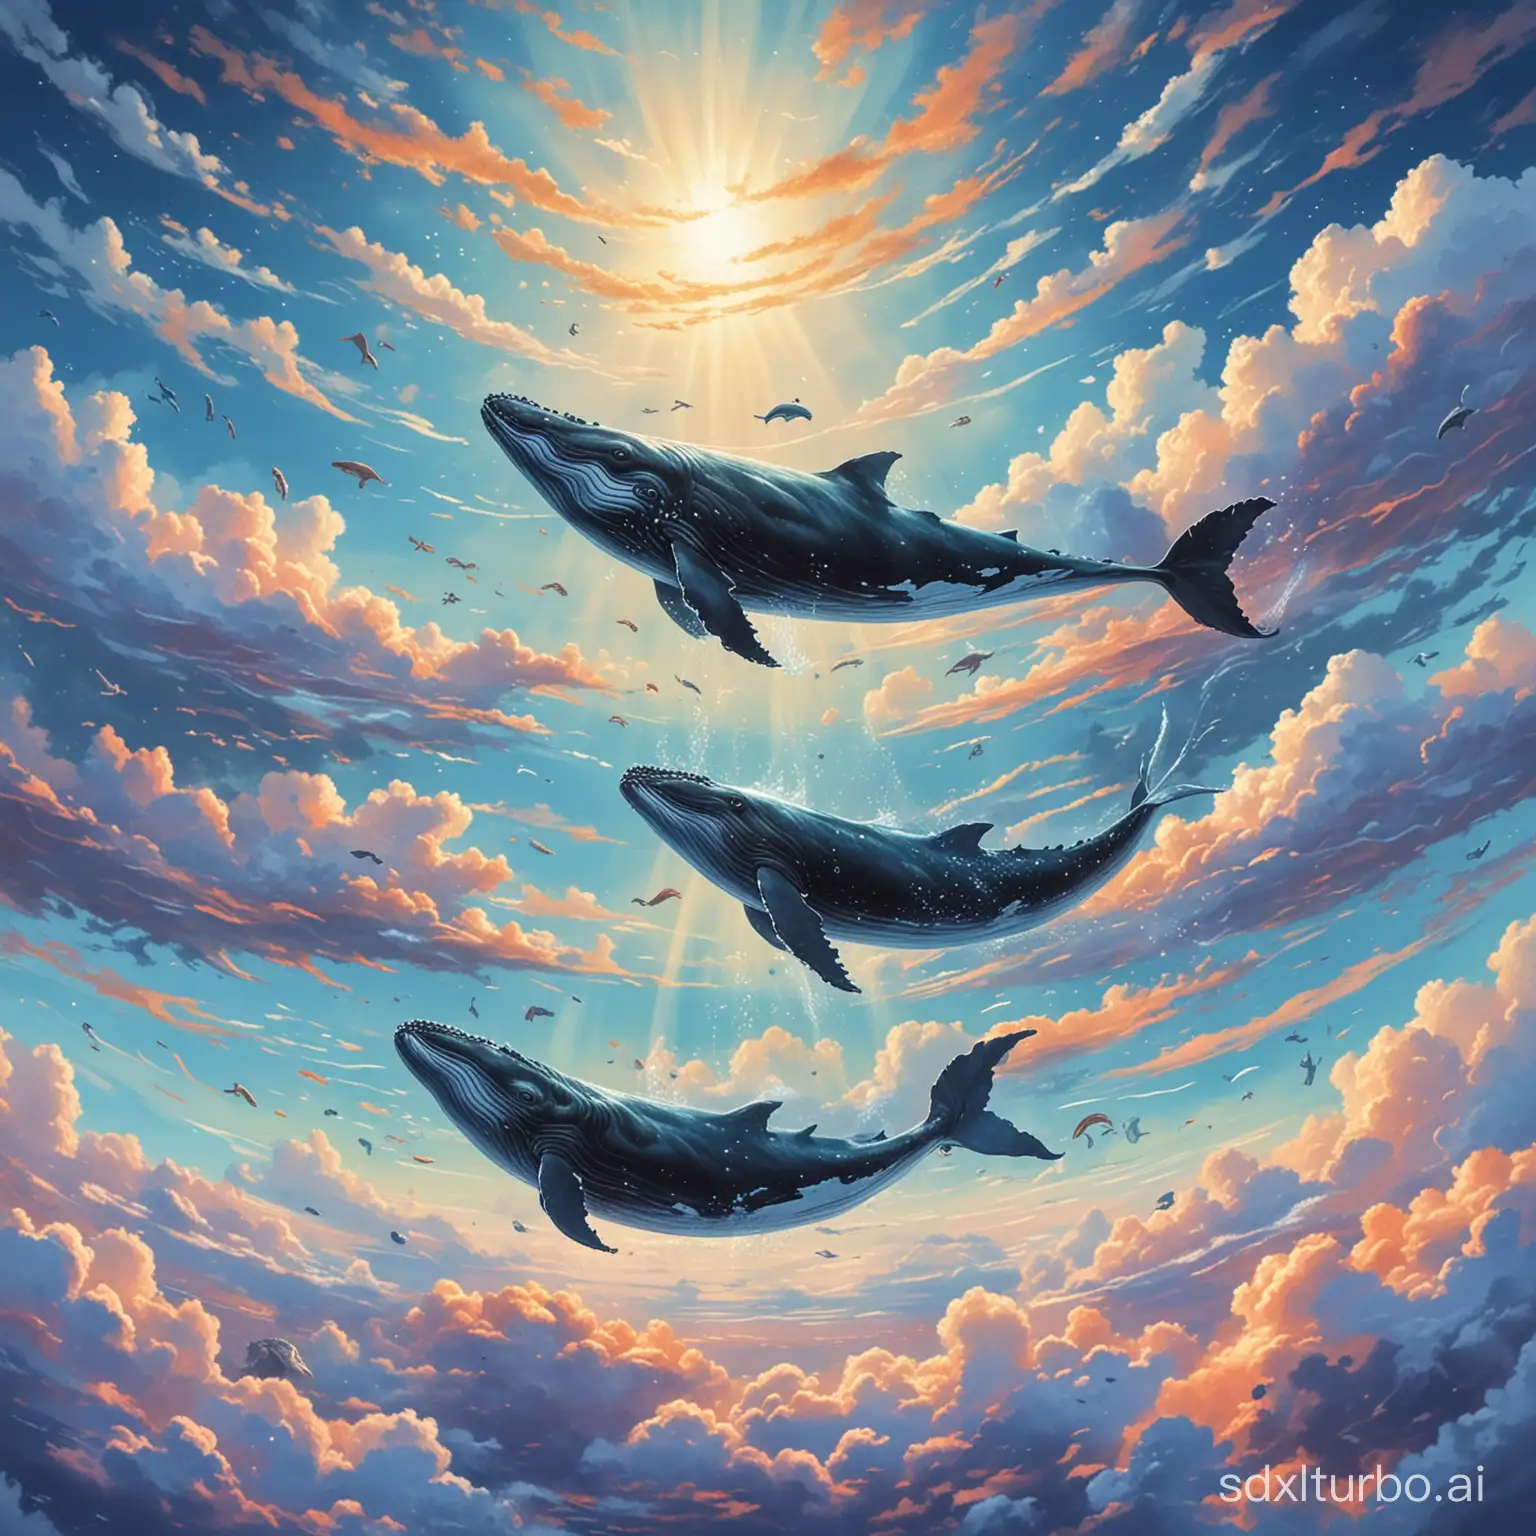 Whales swim in the sky